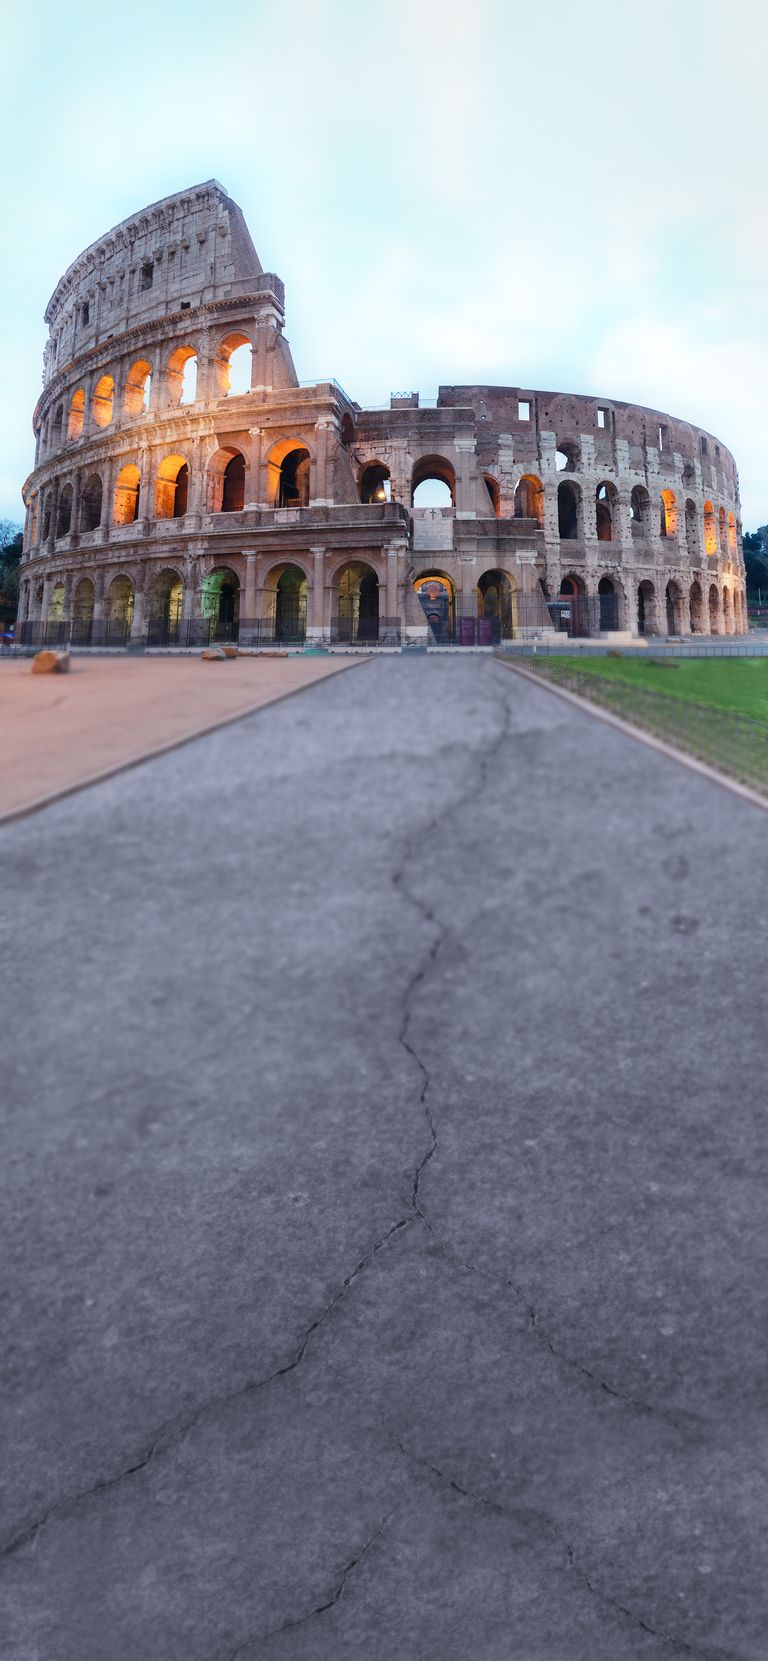 Colosseum: The Whole Story